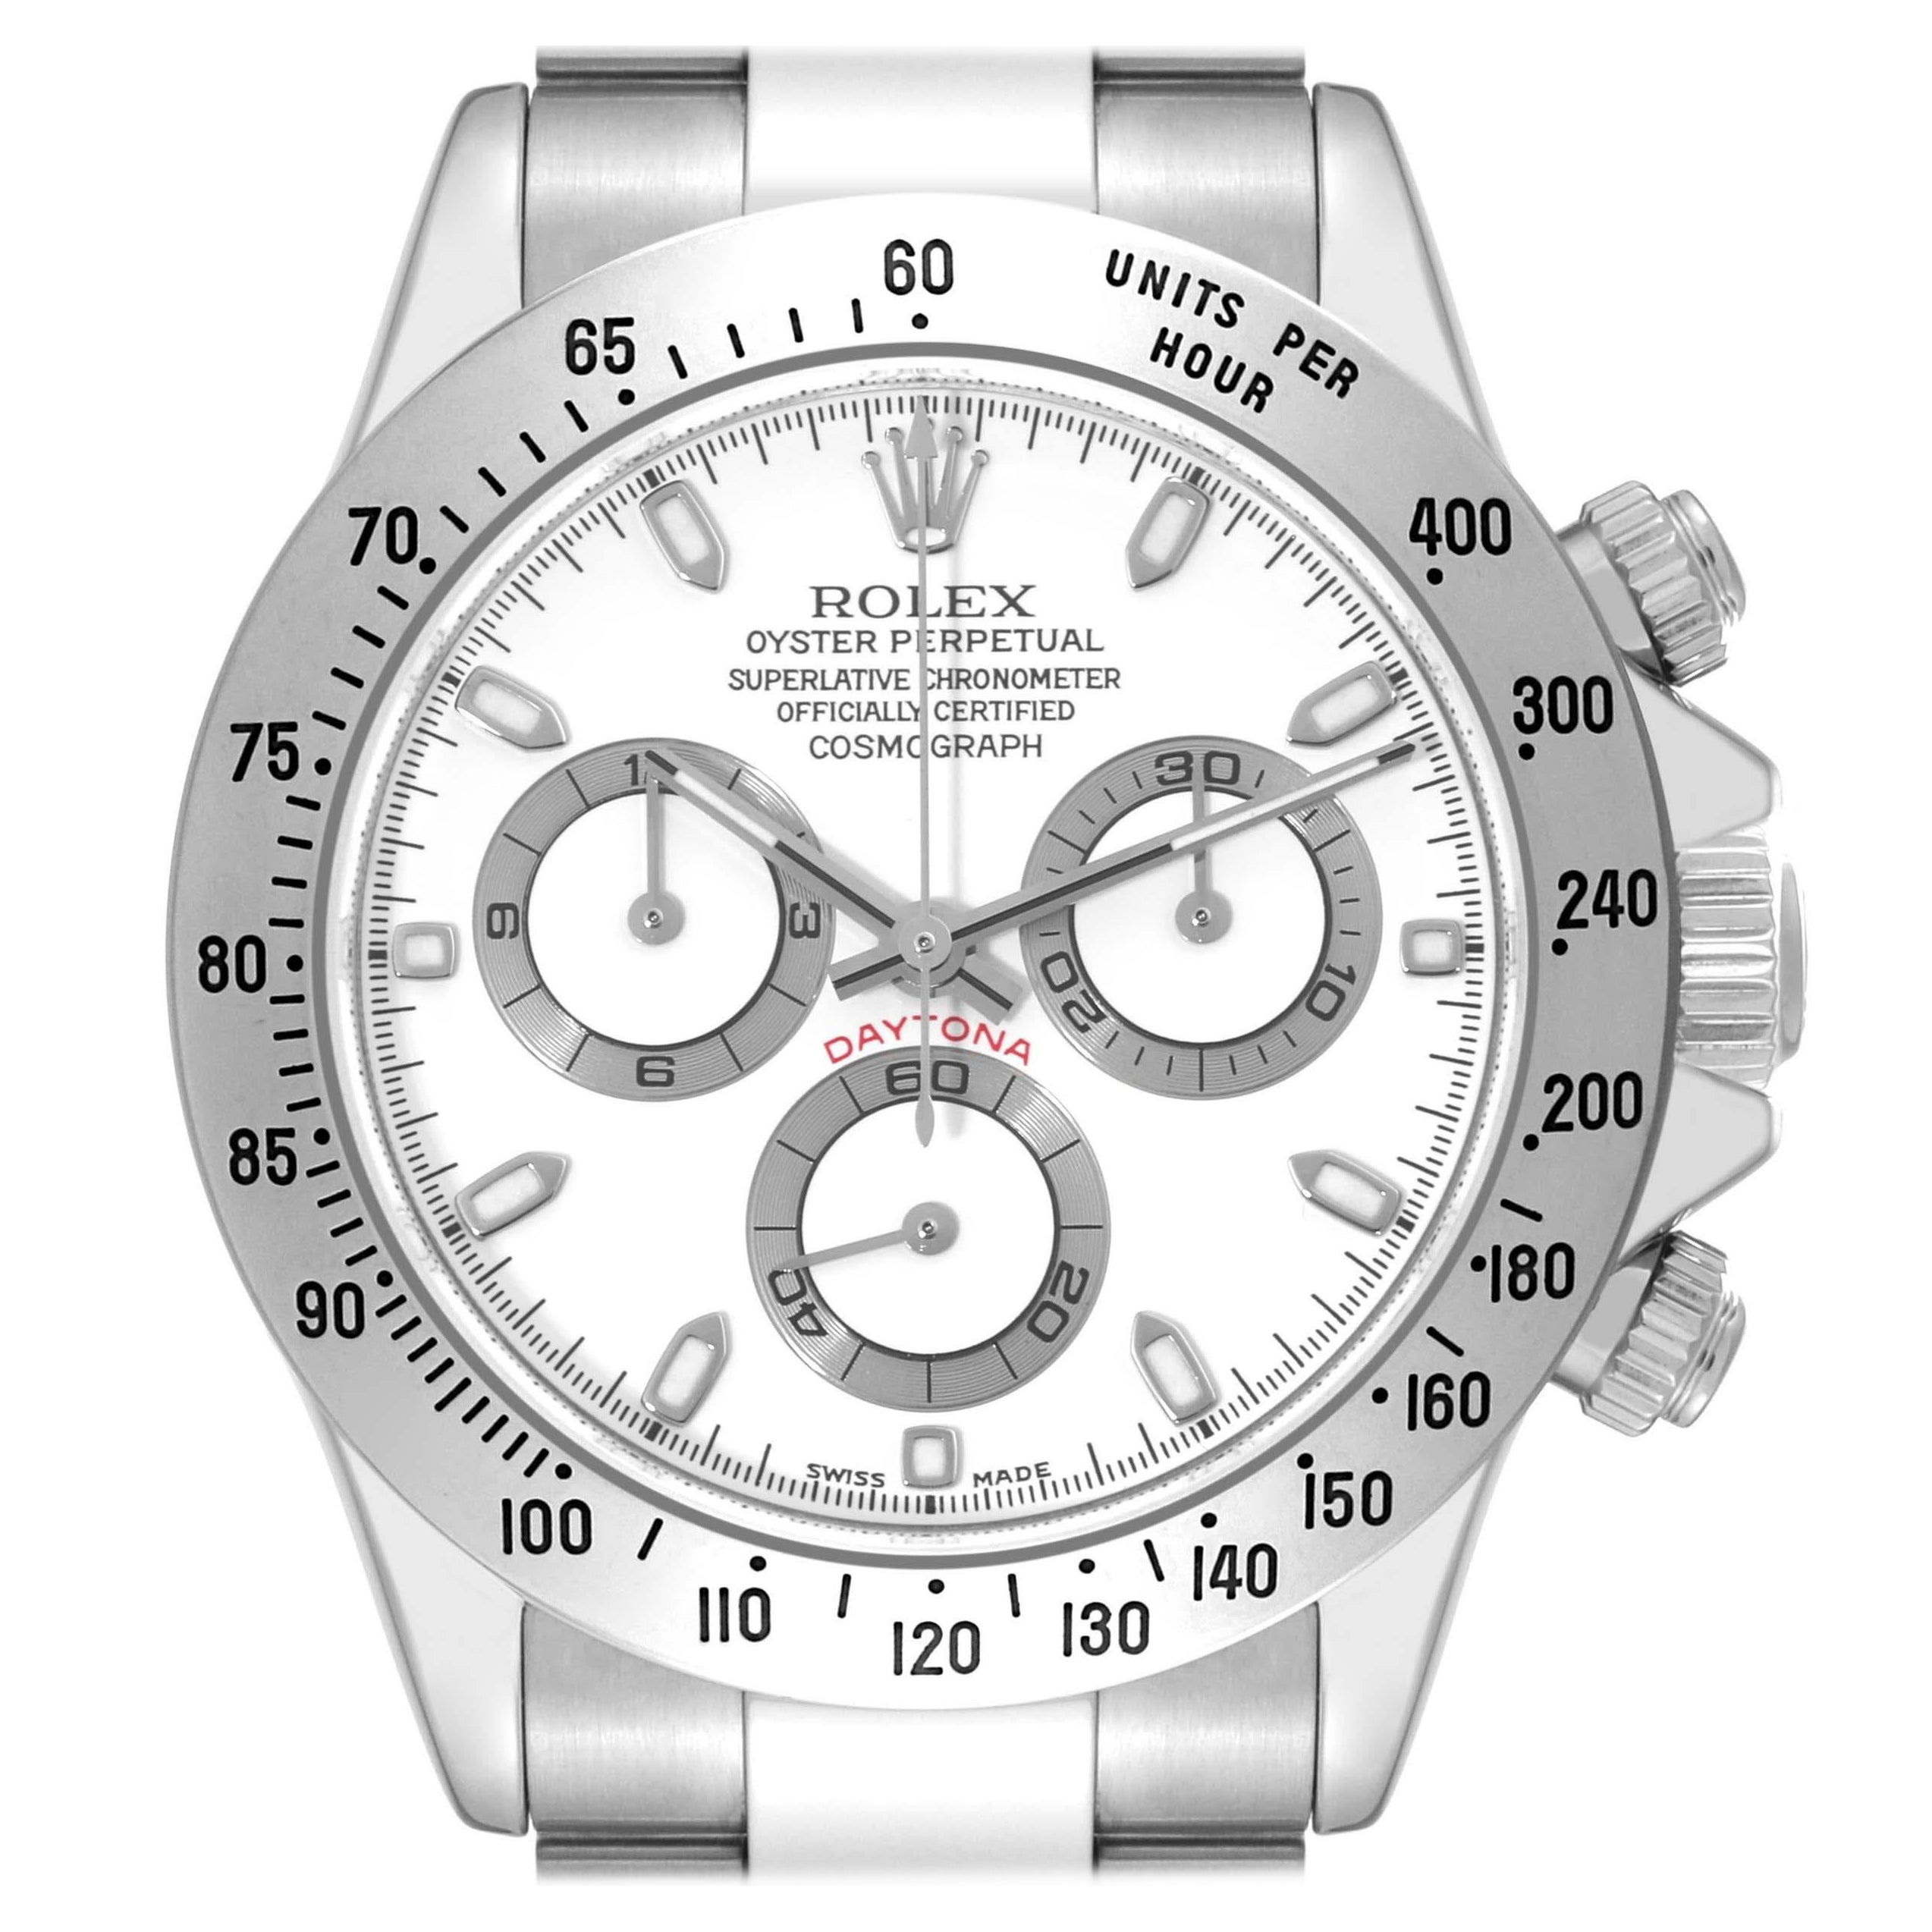 Rolex Daytona White Dial Chronograph Steel Mens Watch 116520 Box Papers For Sale